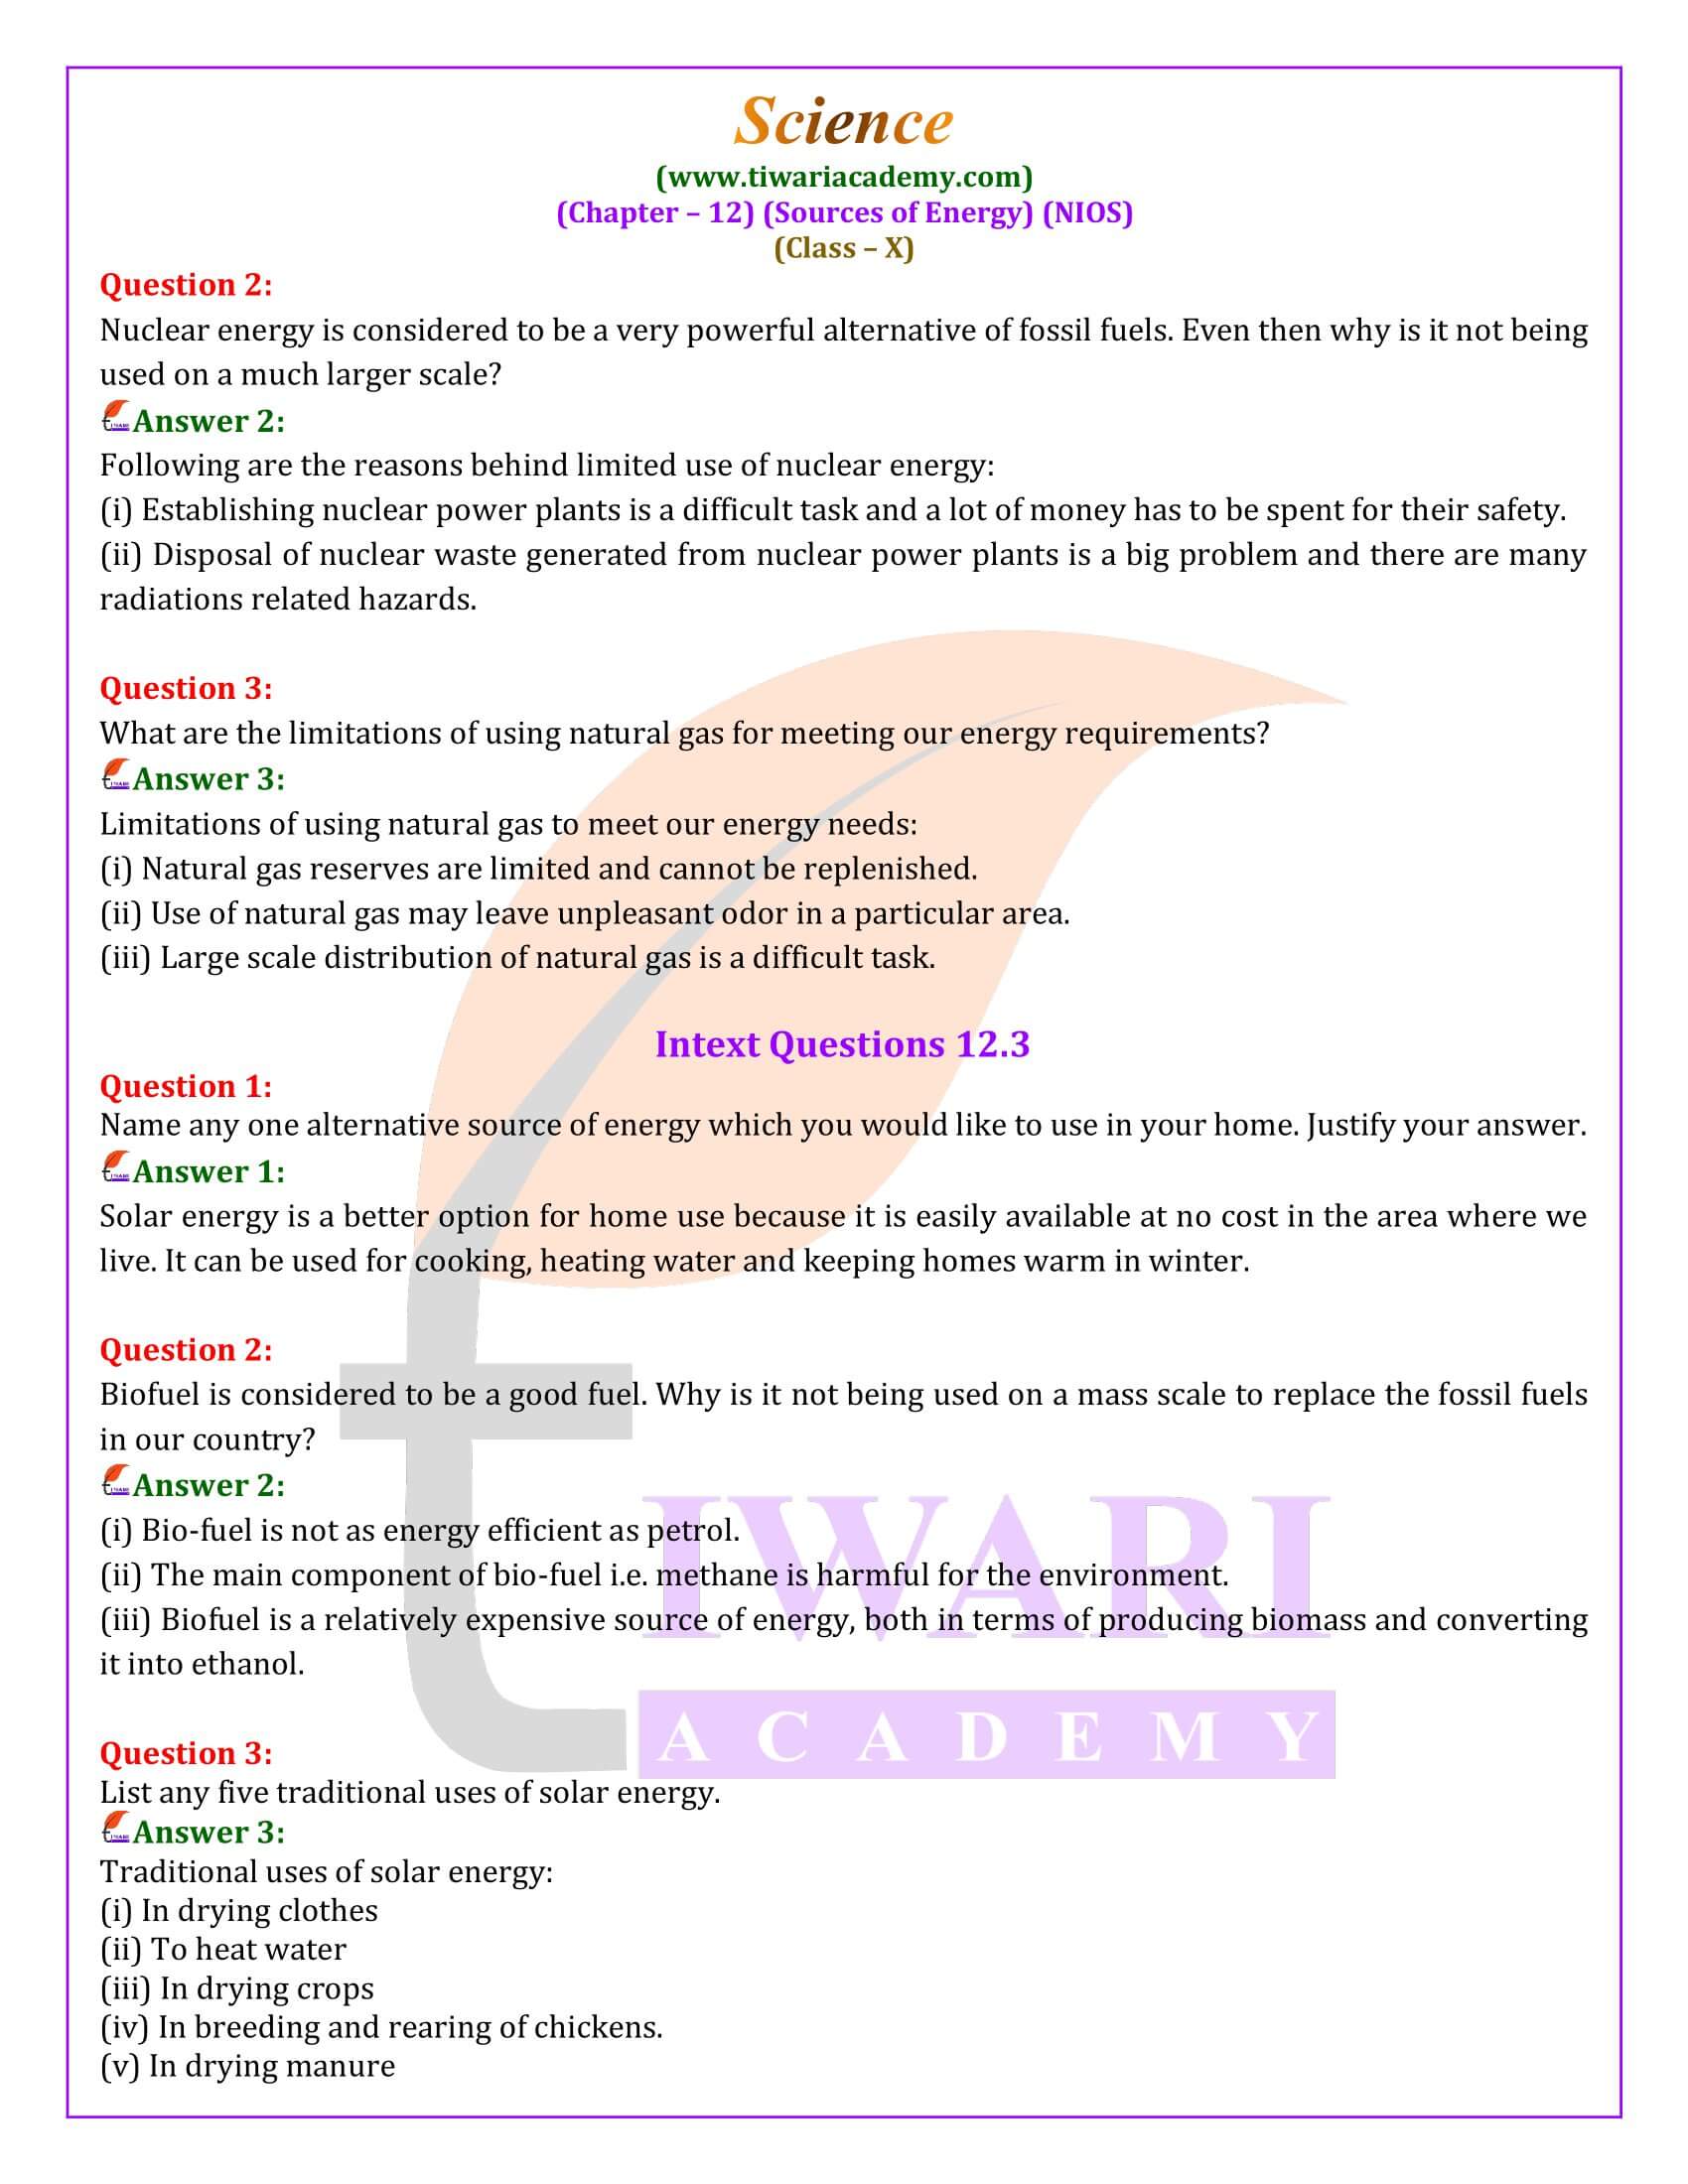 NIOS Class 10 Science Chapter 12 Sources of Energy Question Answers